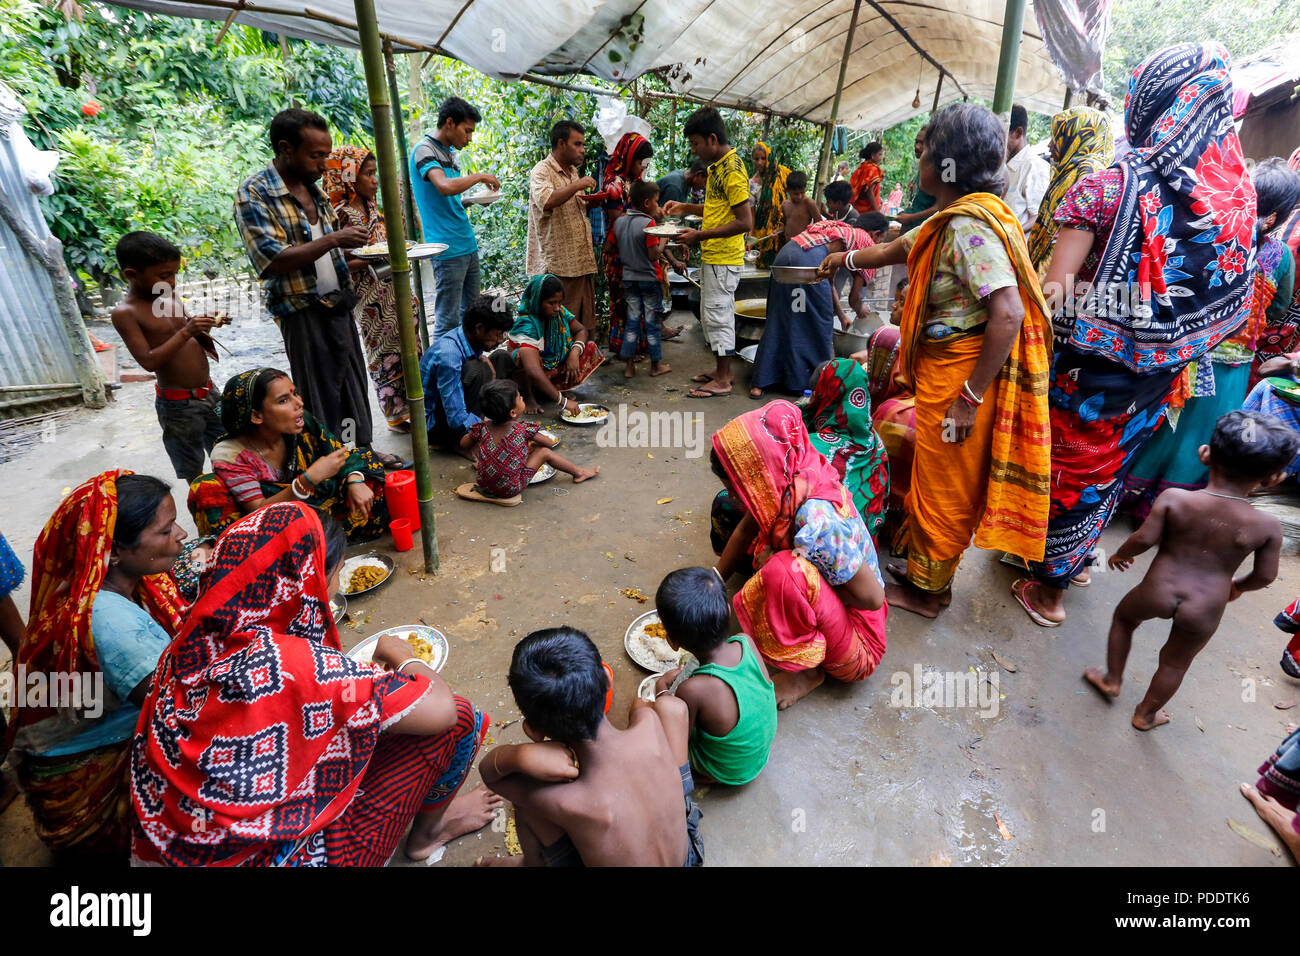 Hindu refugees are given meals at a temporary shelter near Kutupalong in Cox's Bazar. Hundreds of Hindus fled Myanmar's Rakhine to seek shelter in Cox Stock Photo